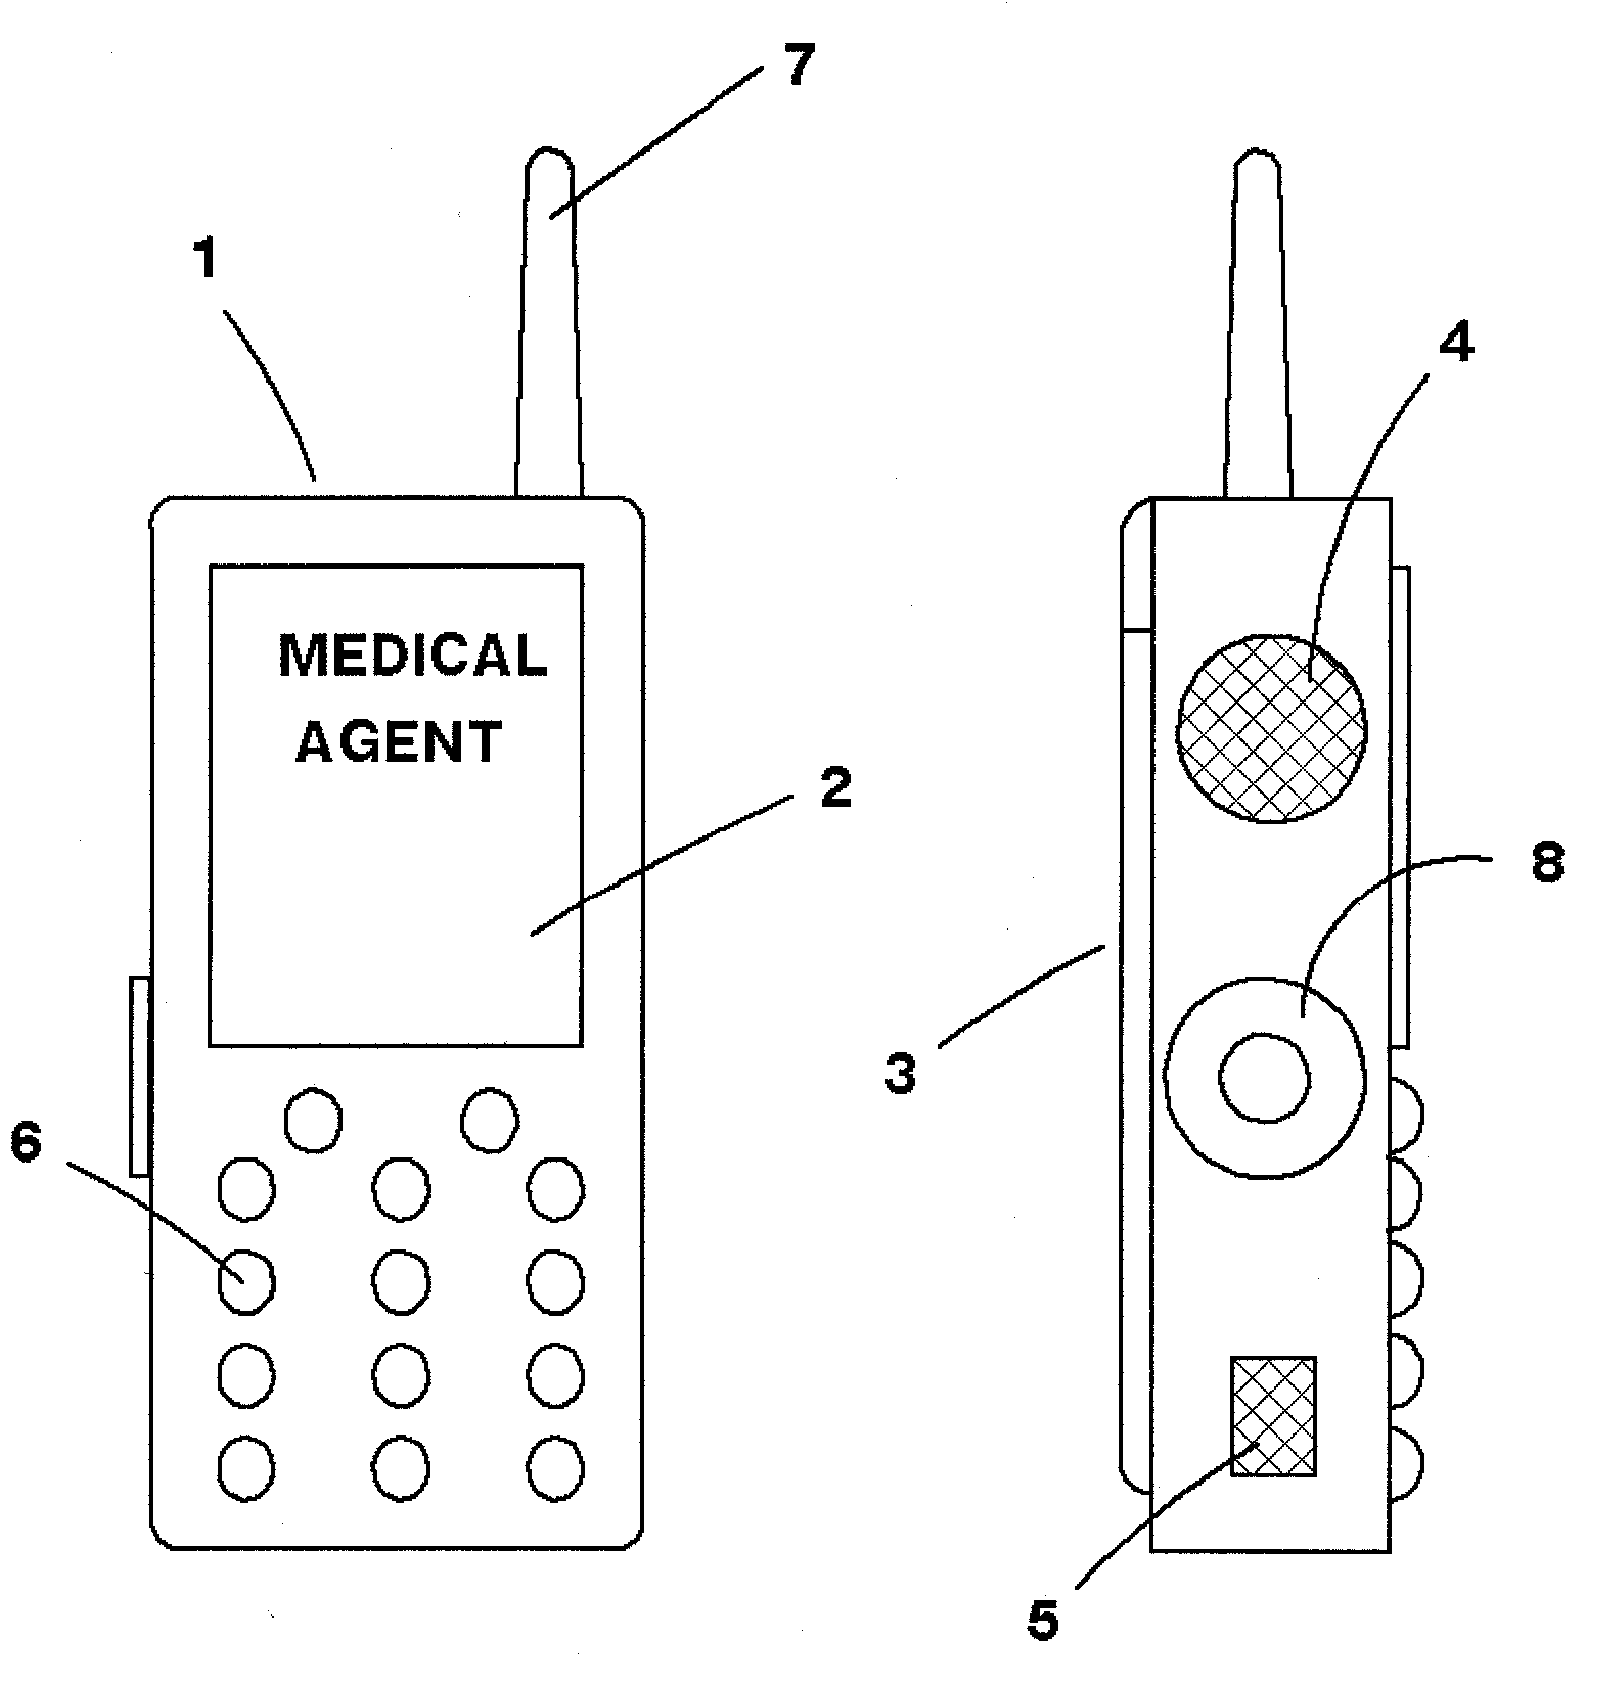 Emergency Medical Diagnosis and Communications Device